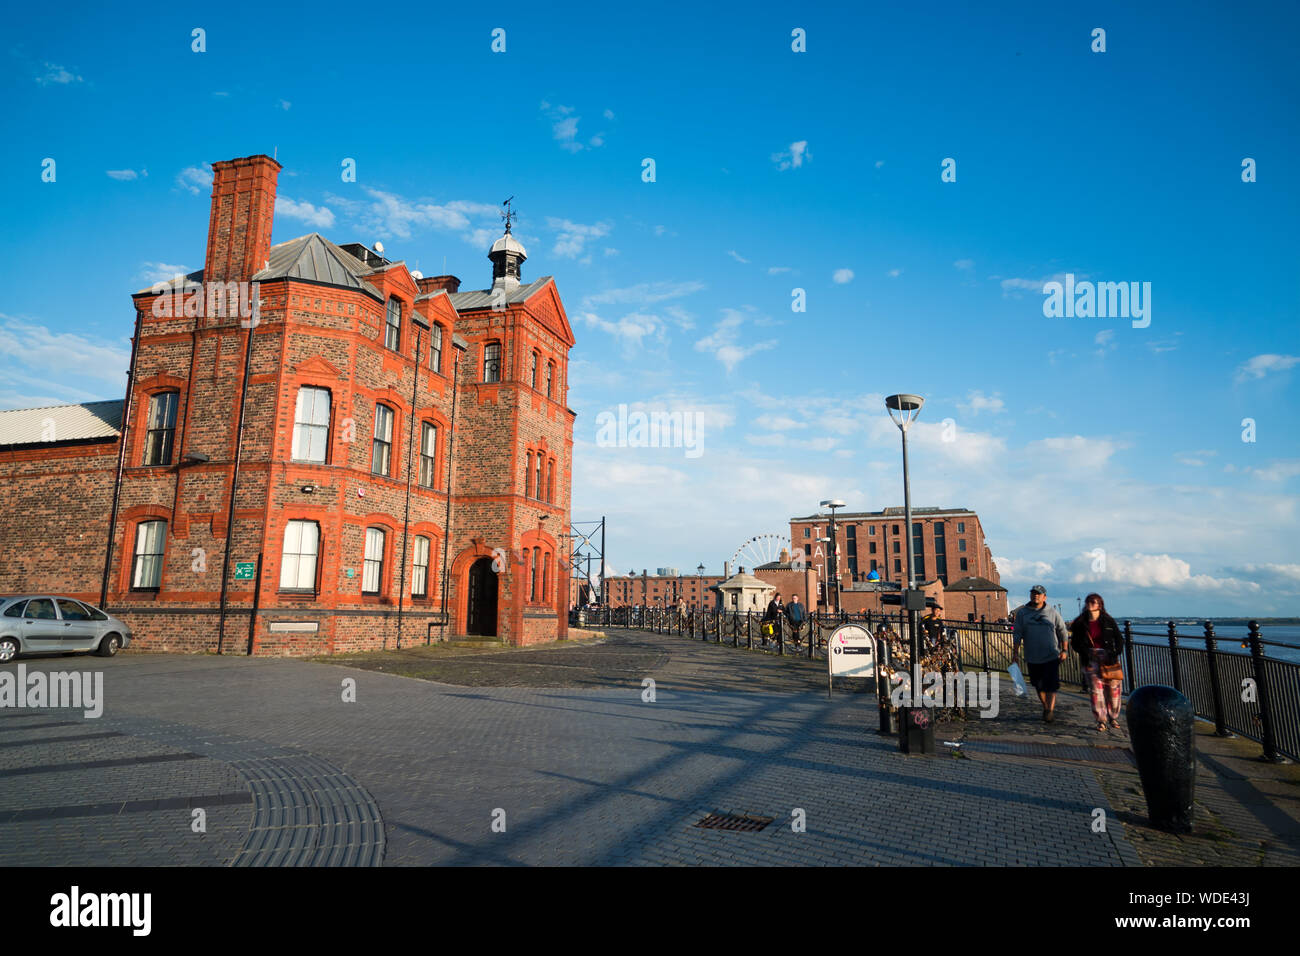 The Pilotage Building situated between the Royal Albert Dock and Museum of Liverpool on Liverpool waterfront Stock Photo